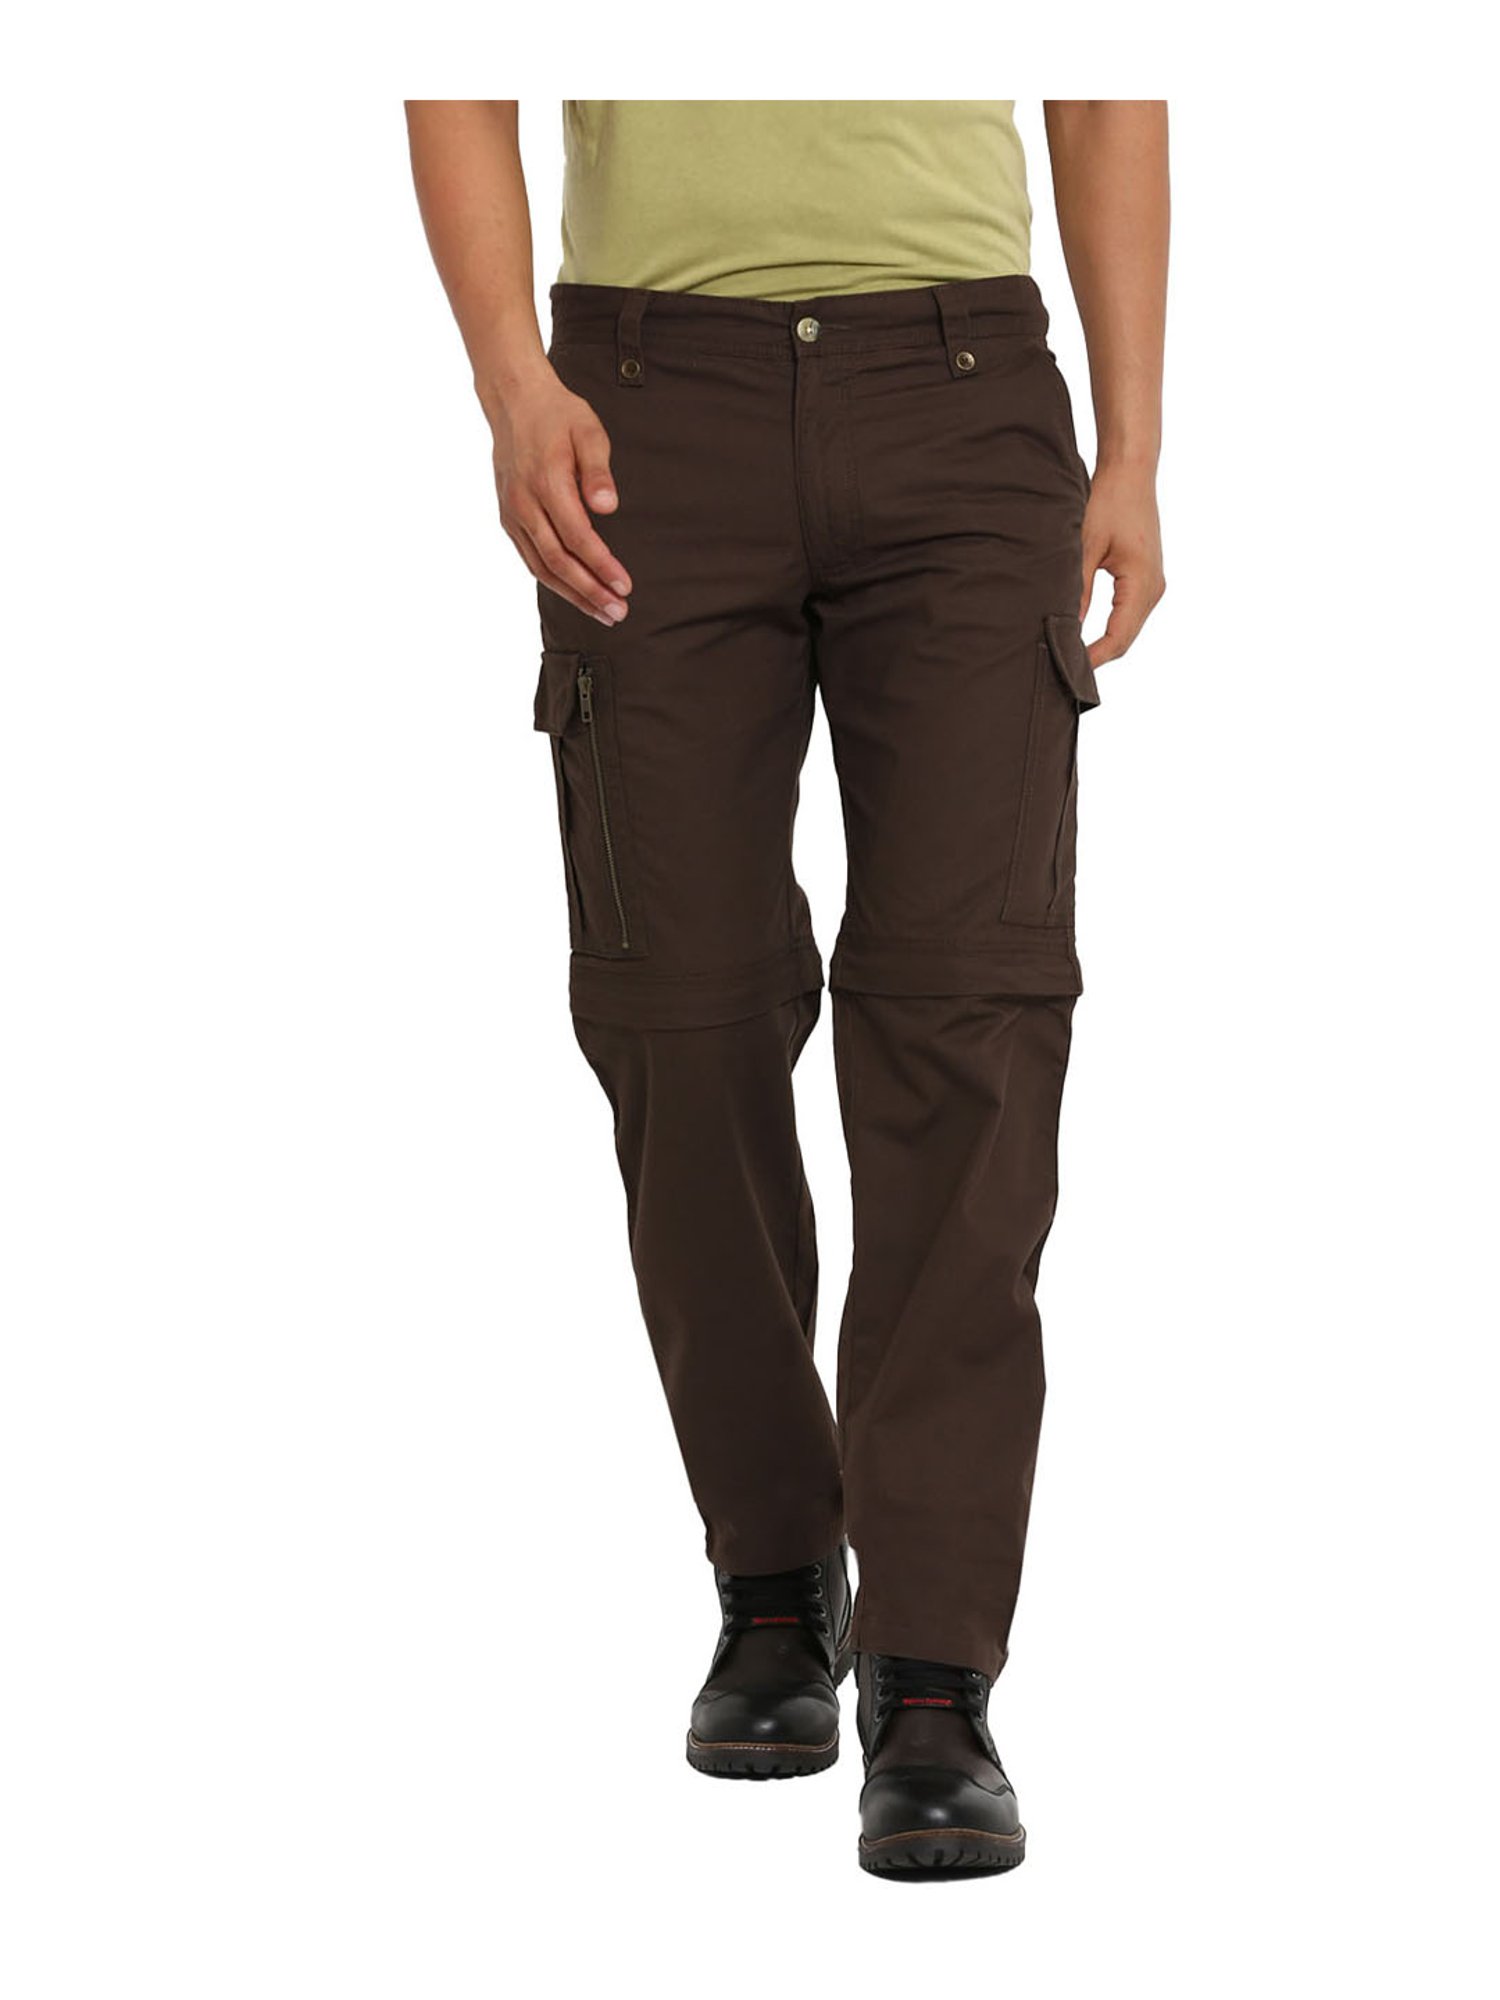 Royal Enfield Solid Cotton Slim Fit Mens Trousers  A20TRAW20003BR001Brown30  Amazonin Clothing  Accessories